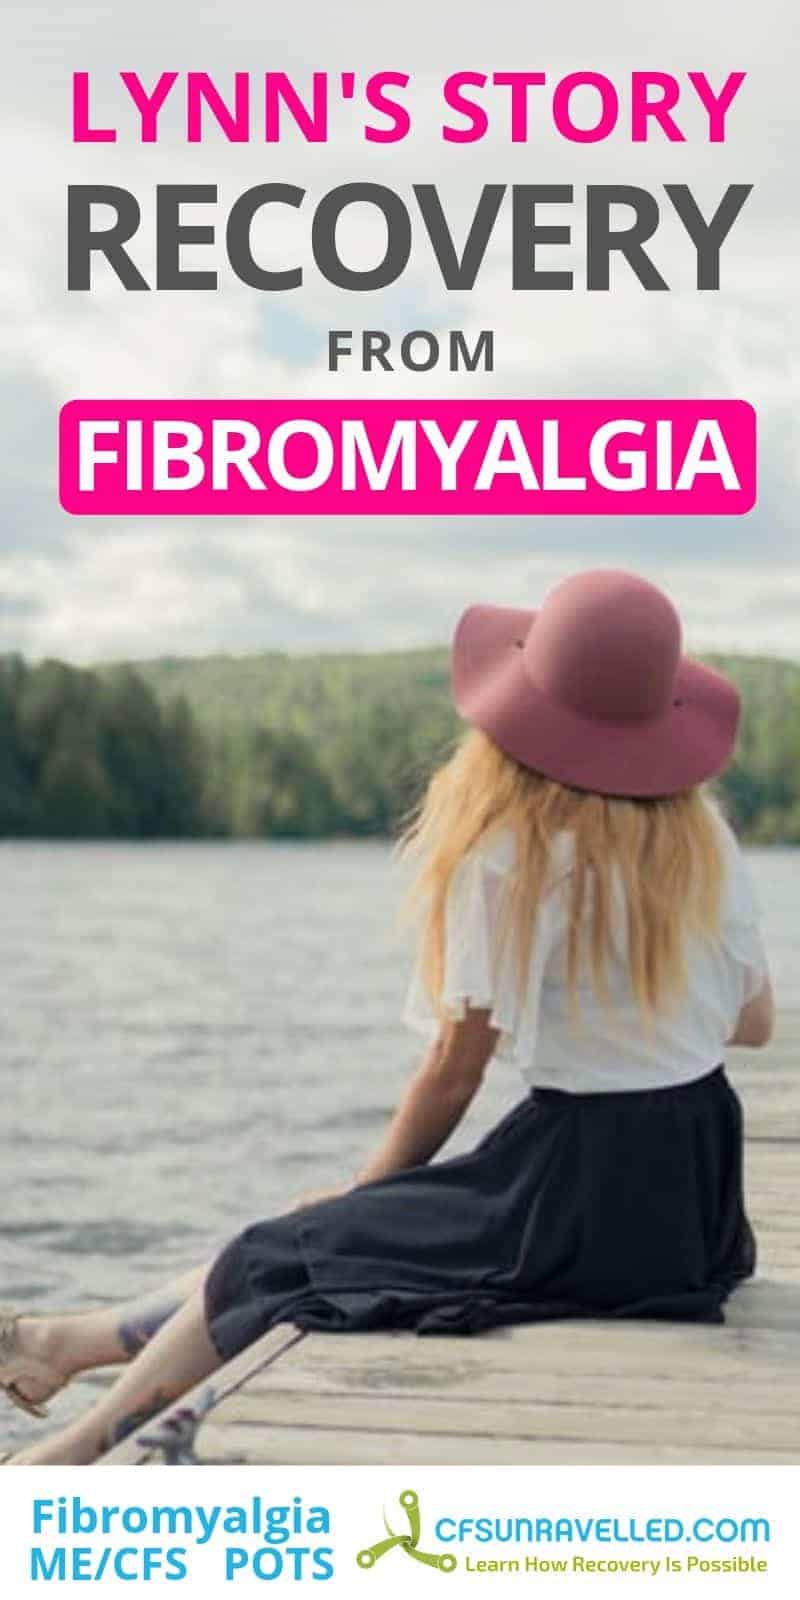 woman by the water with headline about Lynns recovery from fibromyalgia